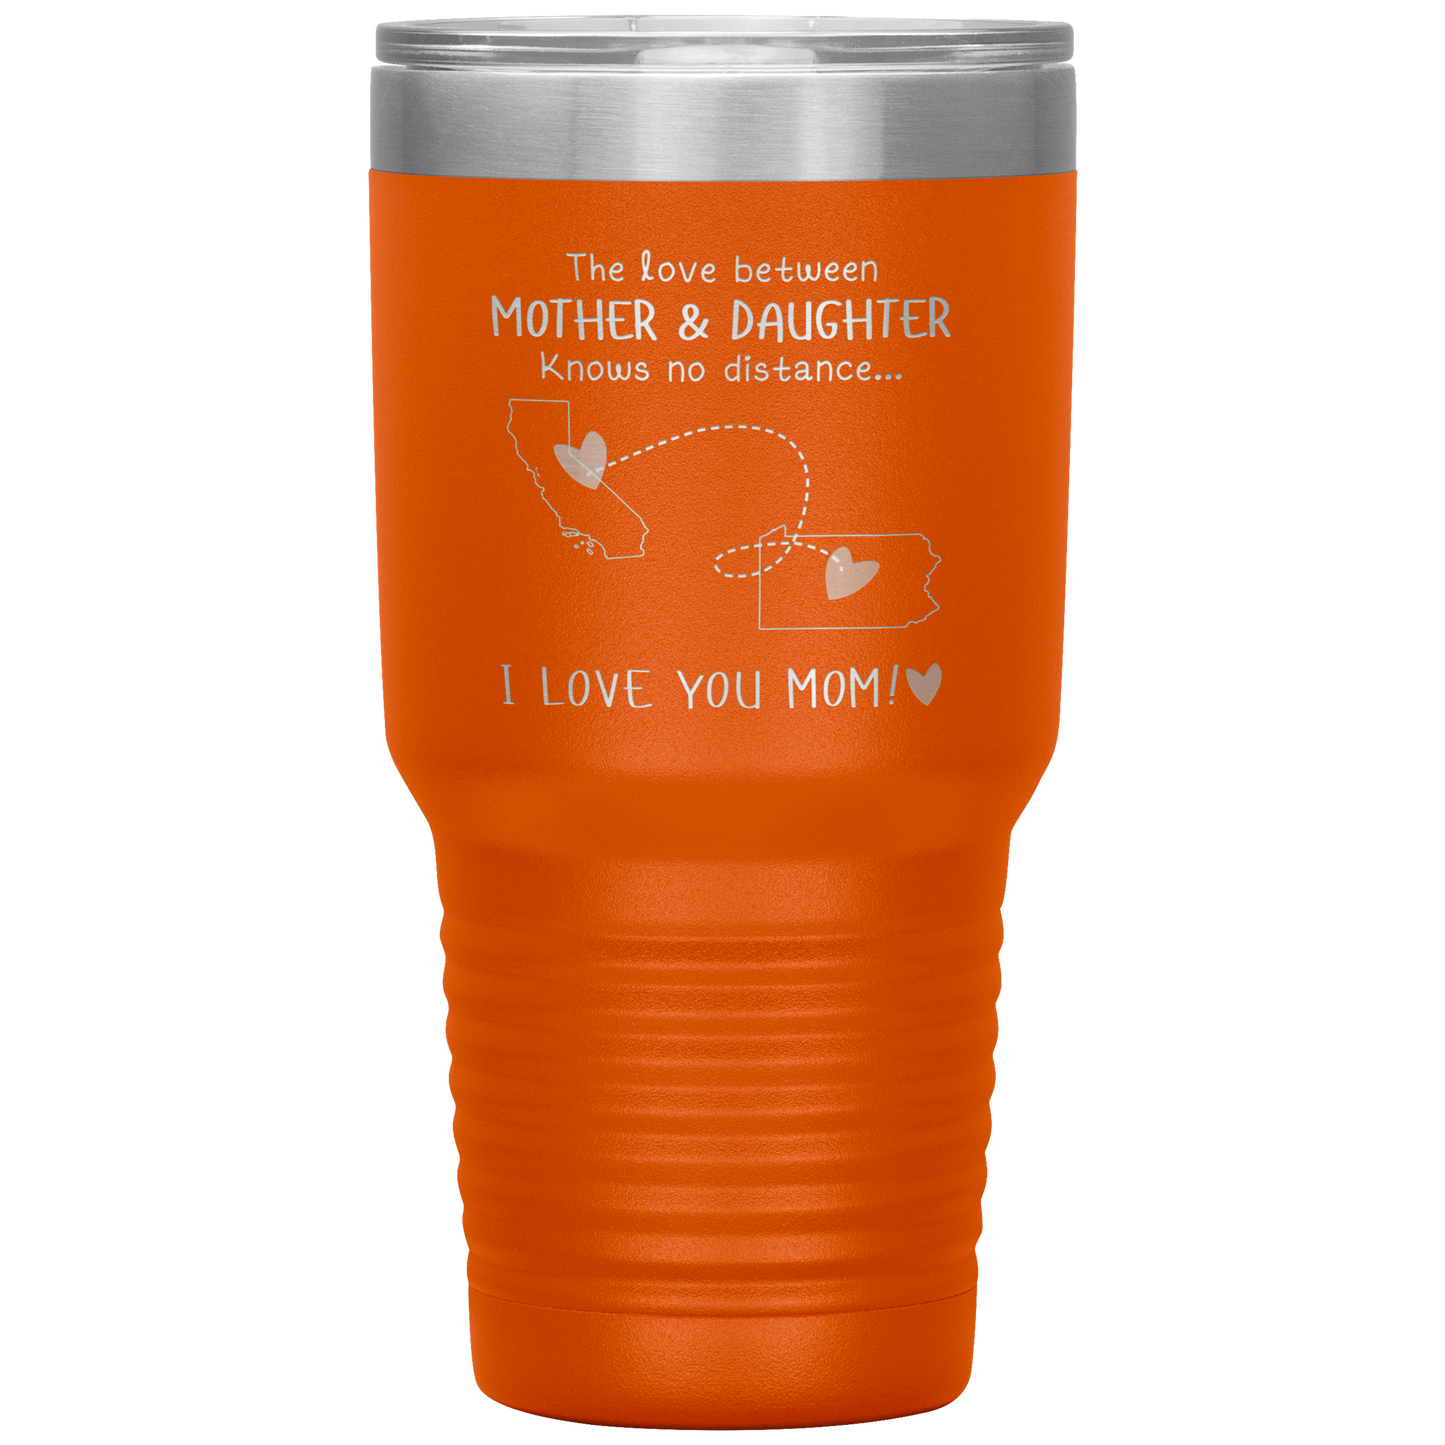 HNV-CUS-GRAND-sp-26141 - [ California | Pennsylvania ] (Tumbler_30oz) Mothers Day Gifts Personalized Mother Day Gifts Coffee Mug F